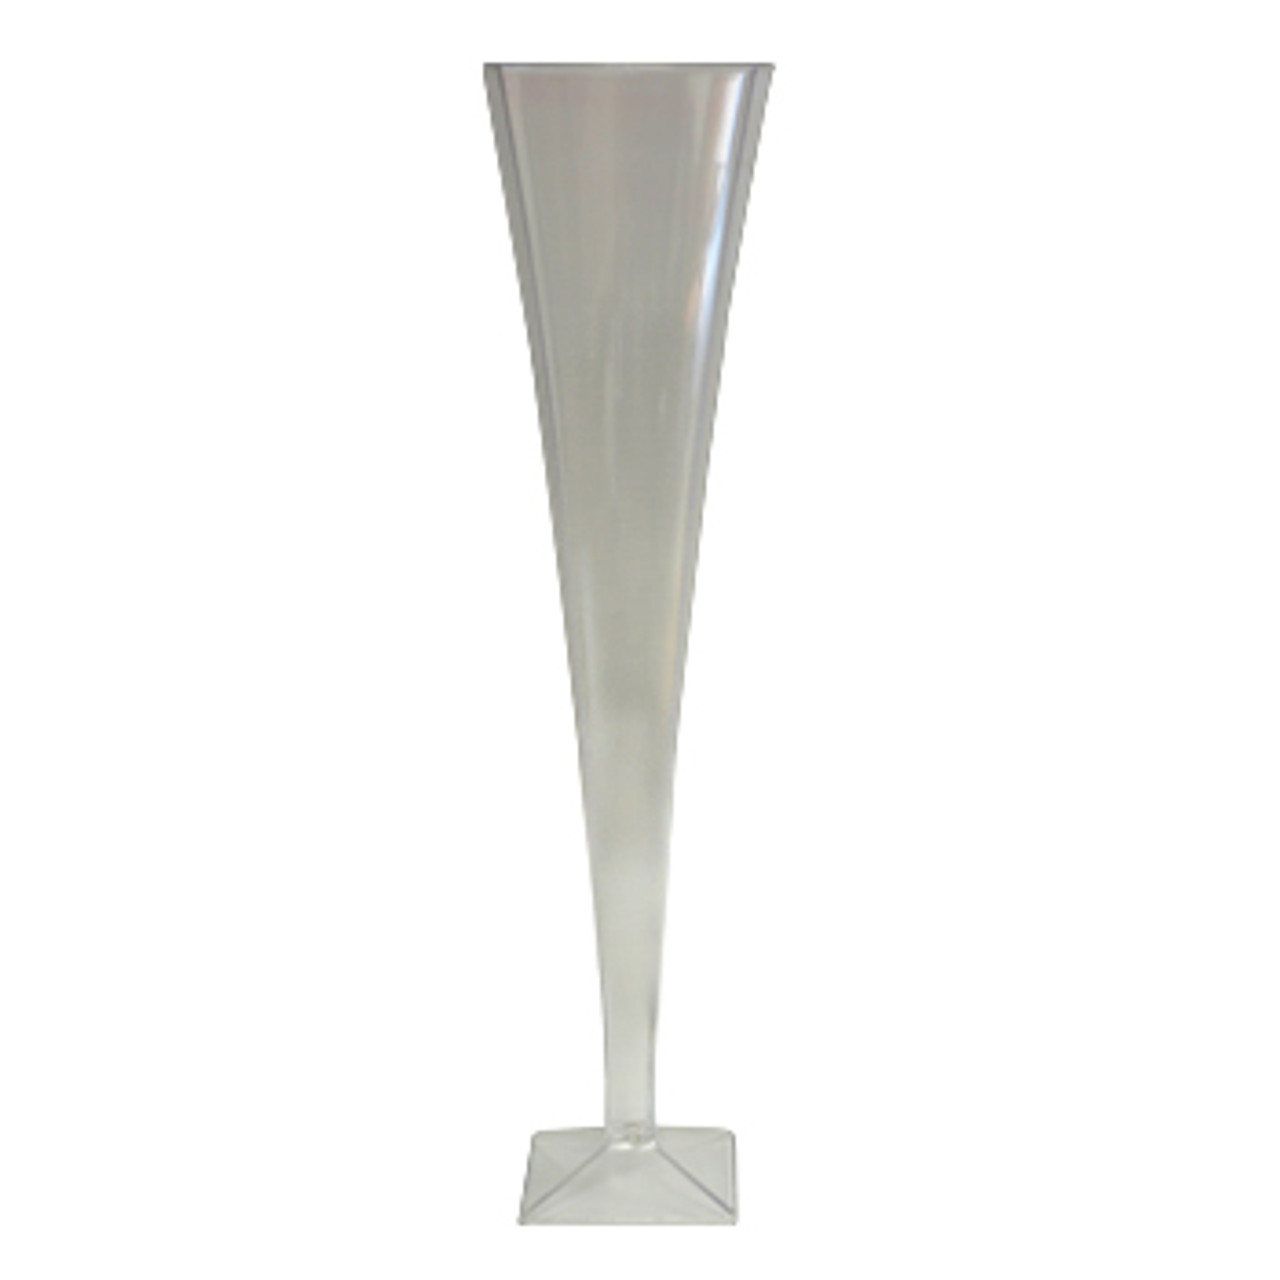 https://cdn11.bigcommerce.com/s-hgqmwywp99/images/stencil/1280x1280/products/49100/43891/5oz-clear-plastic-square-champagne-flutes-6pk-maryland-plastics-16__90678.1675880303.jpg?c=1?imbypass=on